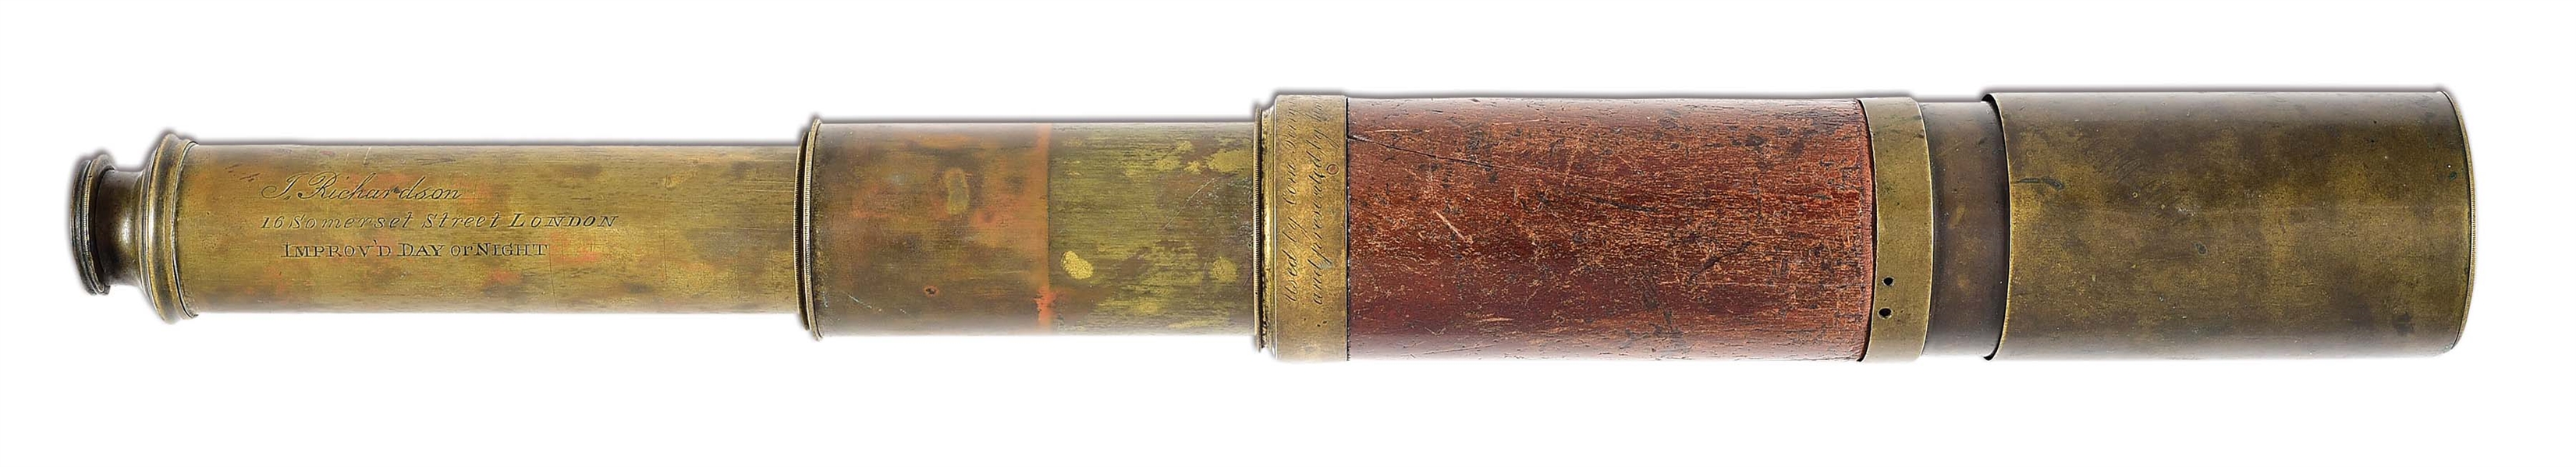 OLIVER H. PERRYS TELESCOPE FROM LAKE ERIE BATTLE, PRESENTED TO WILLIAM HENRY HARRISON AND USED AT THE THAMES, 1813.